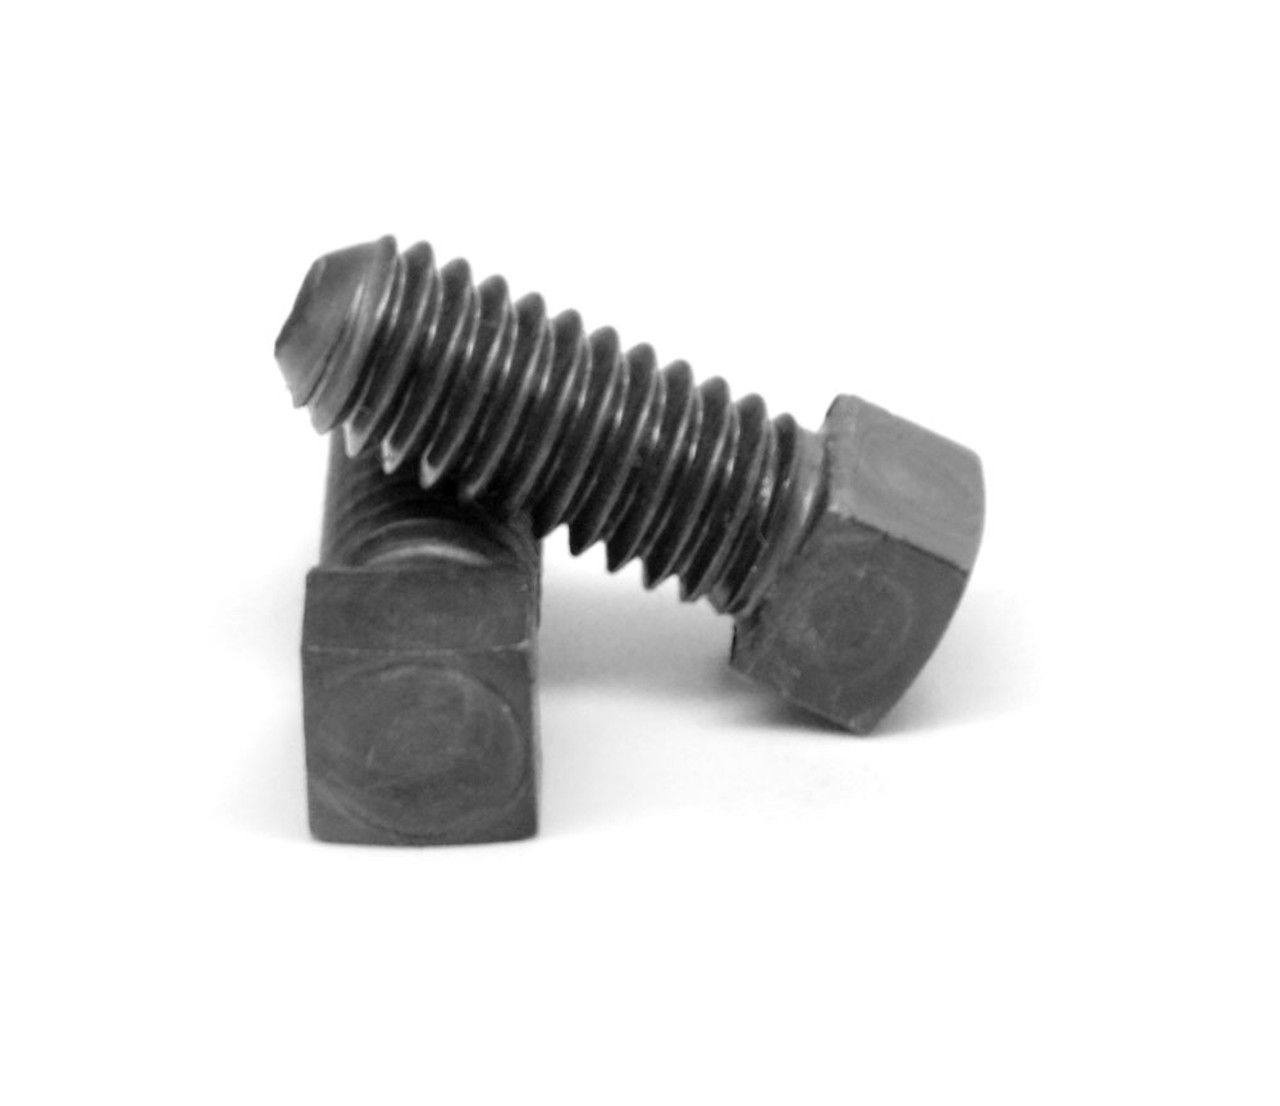 5/16"-18 x 1 1/2" (FT) Coarse Thread Square Head Set Screw Cup Point Through Hardened Alloy Steel Plain Finish